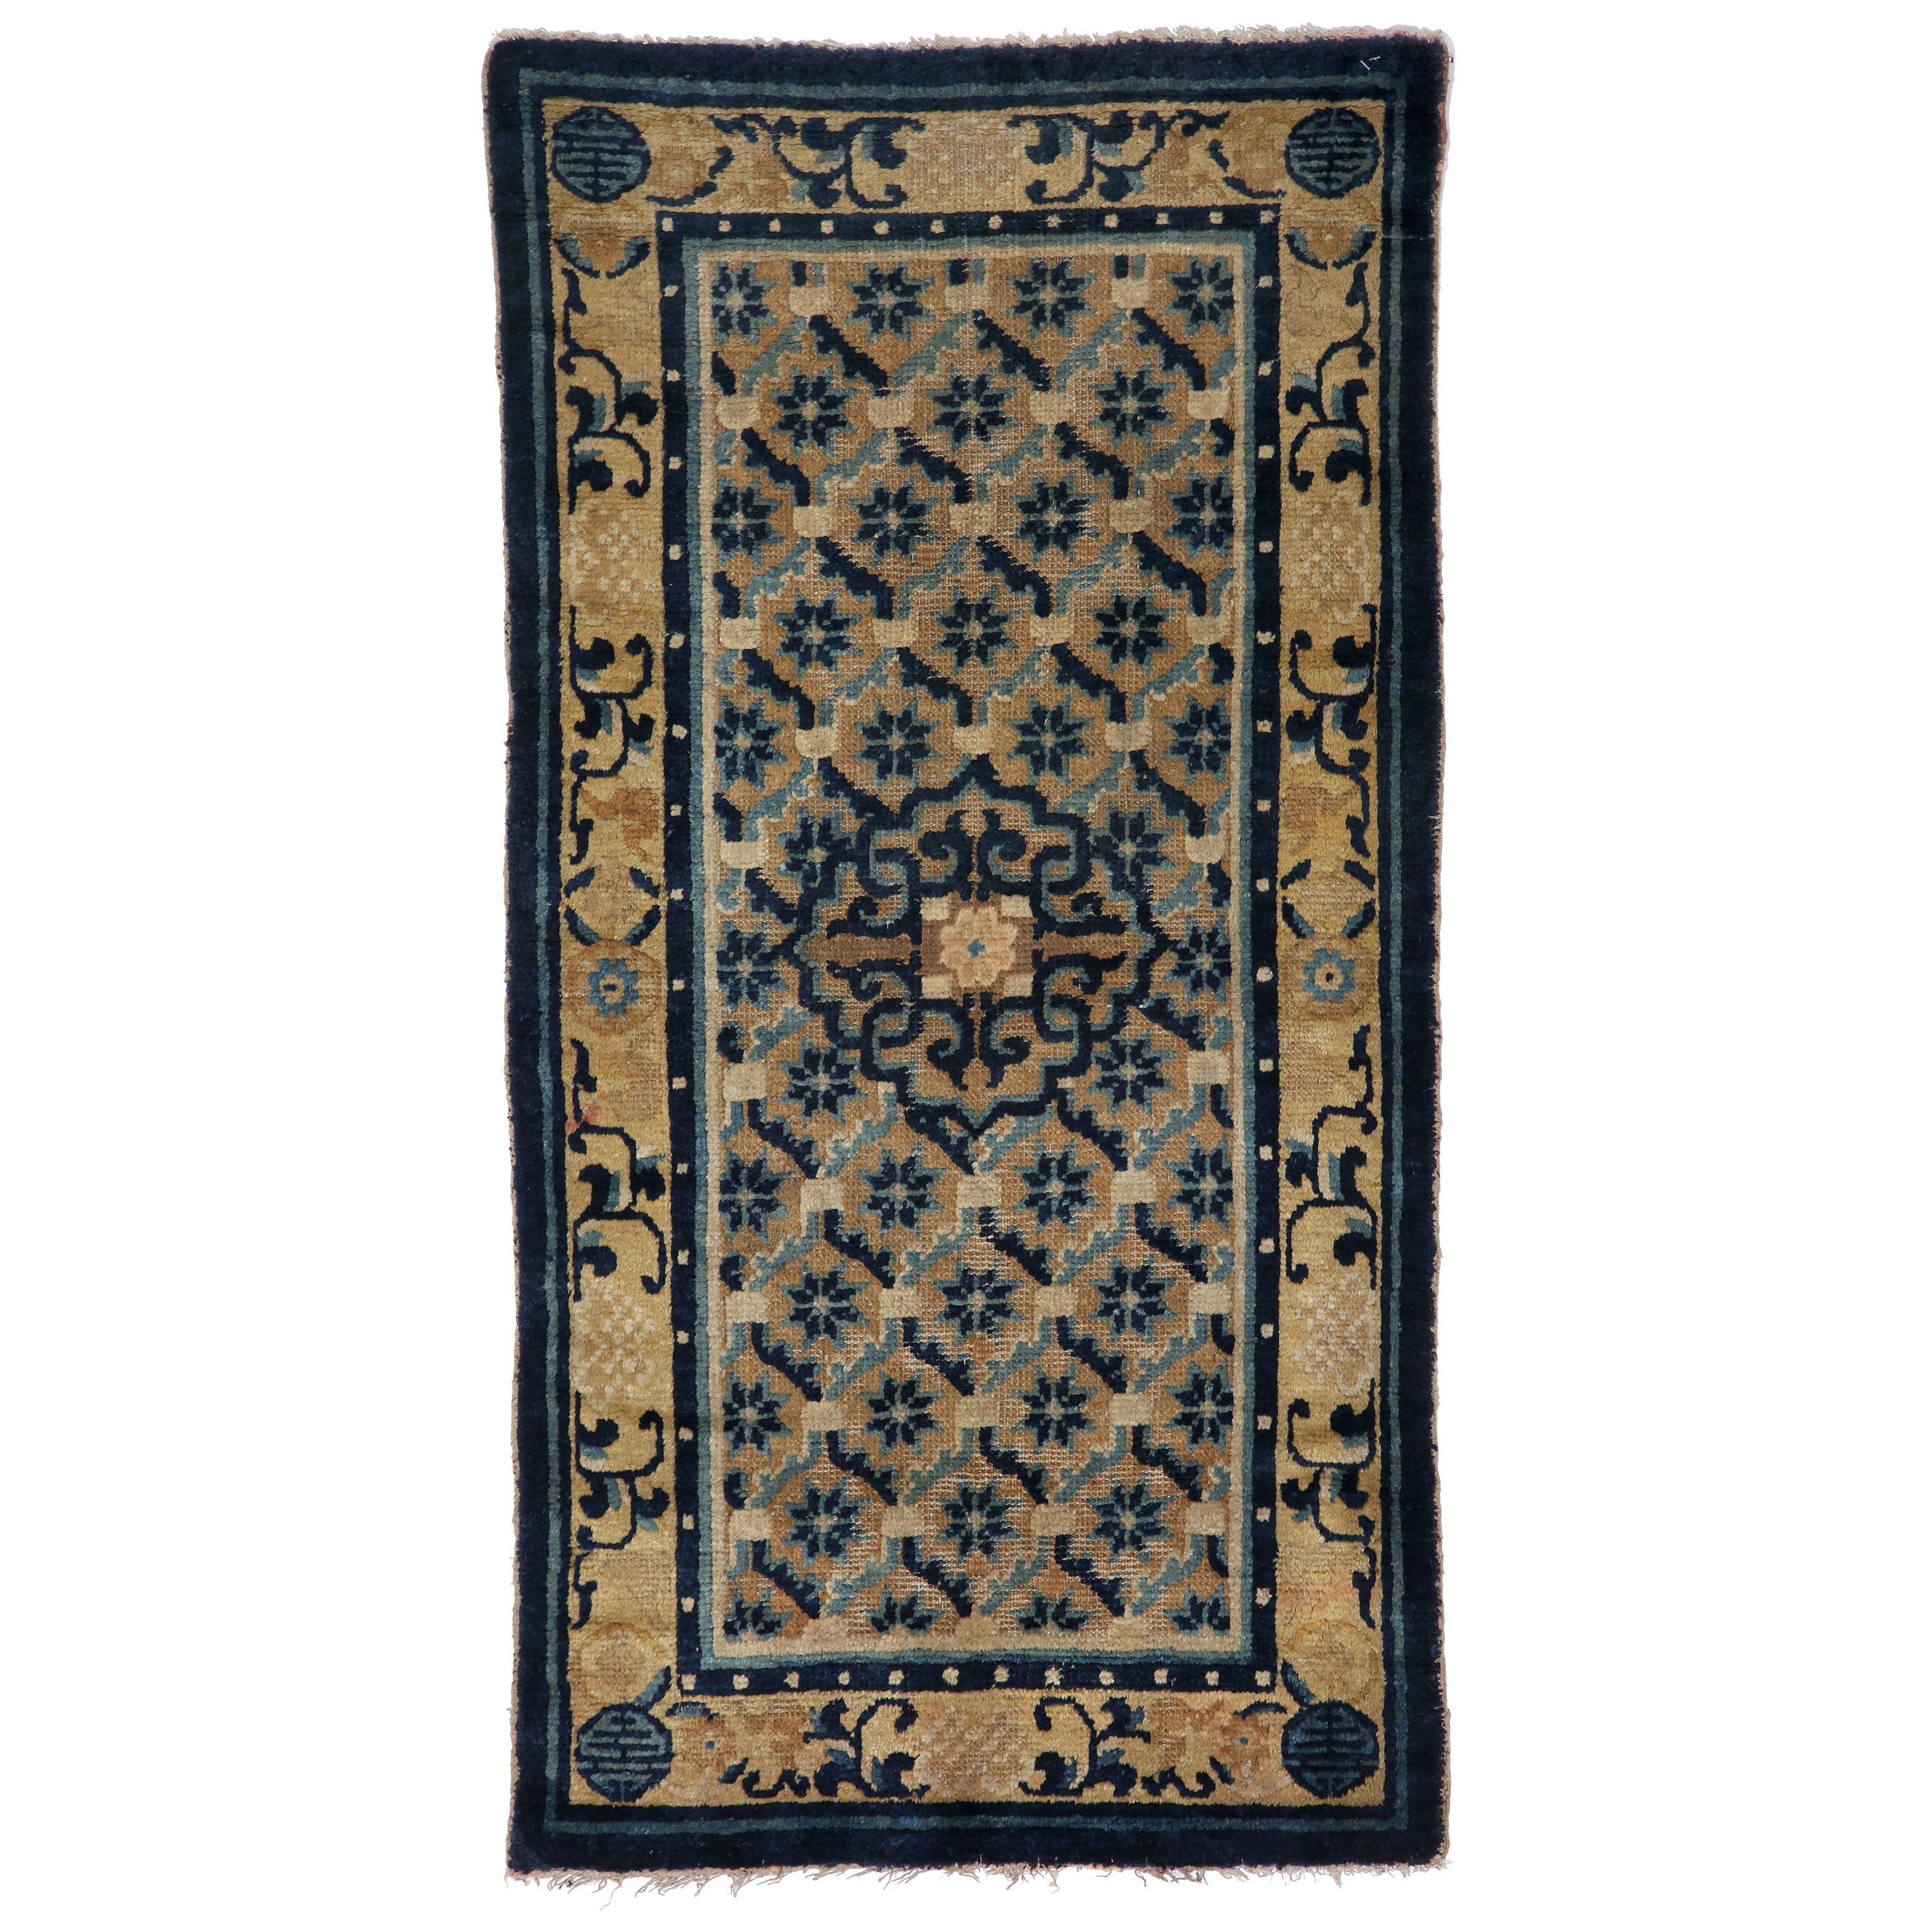 Antique Chinese Ningxia Carpet with Floral and Medallion Motifs